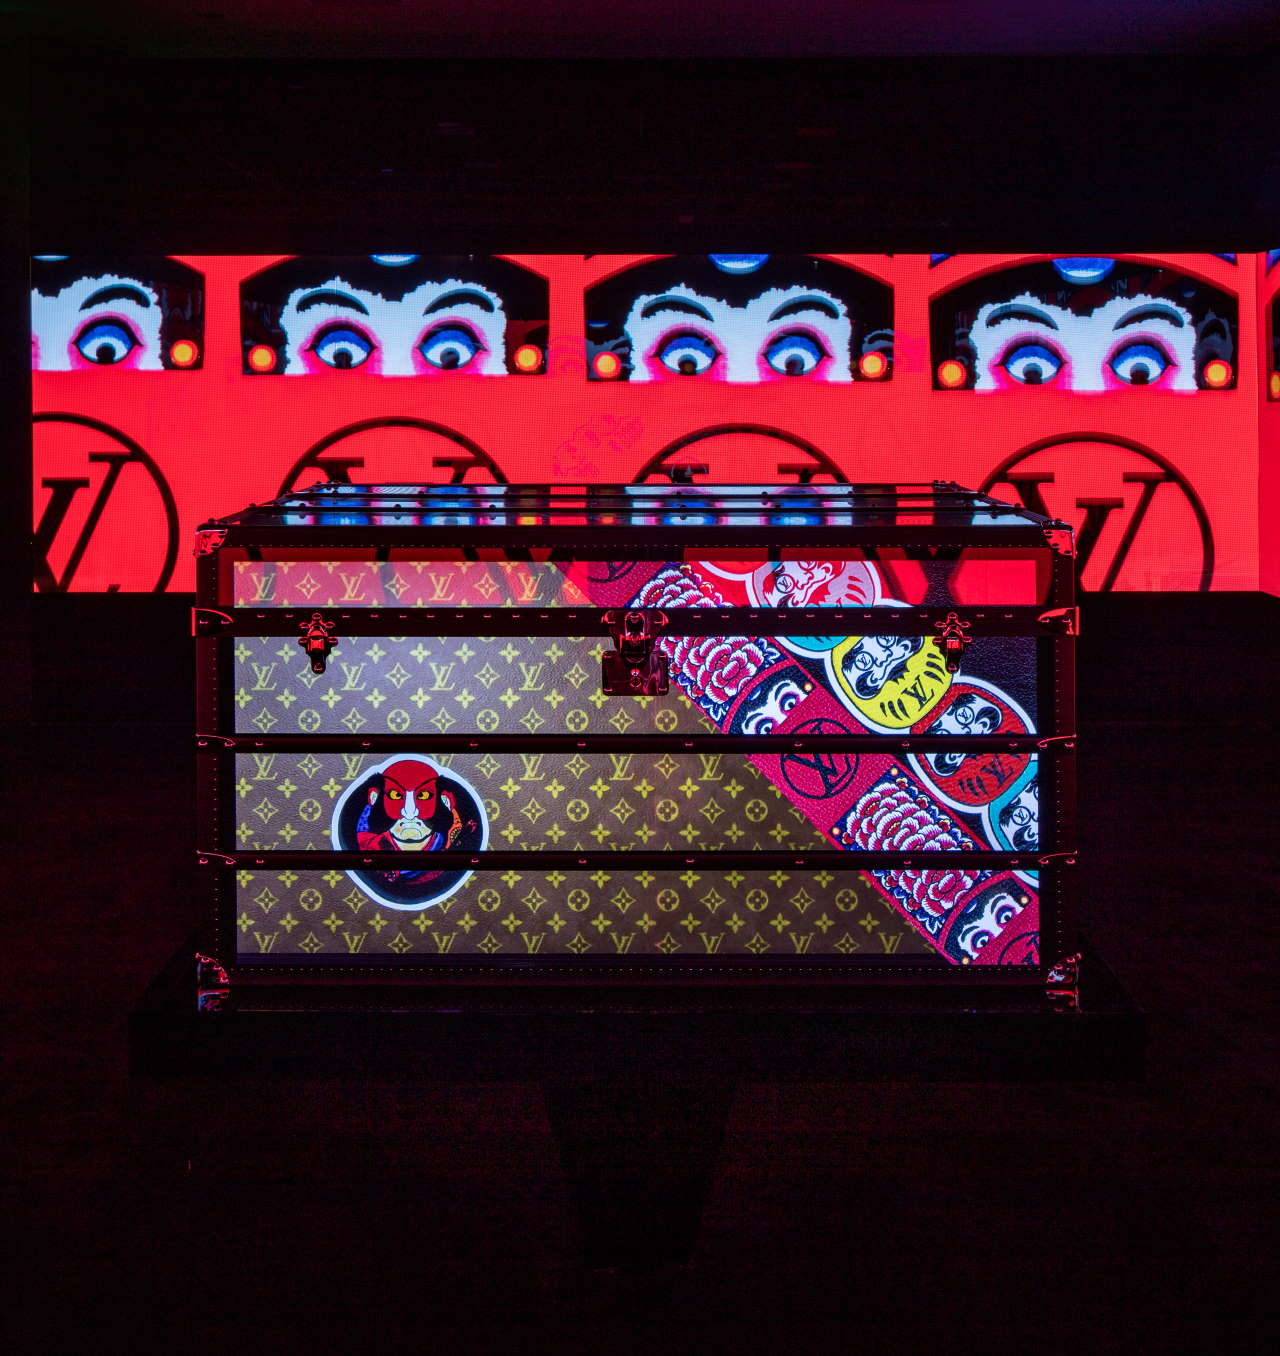 Louis Vuitton Celebrates 160 Years of Artistic Collaborations